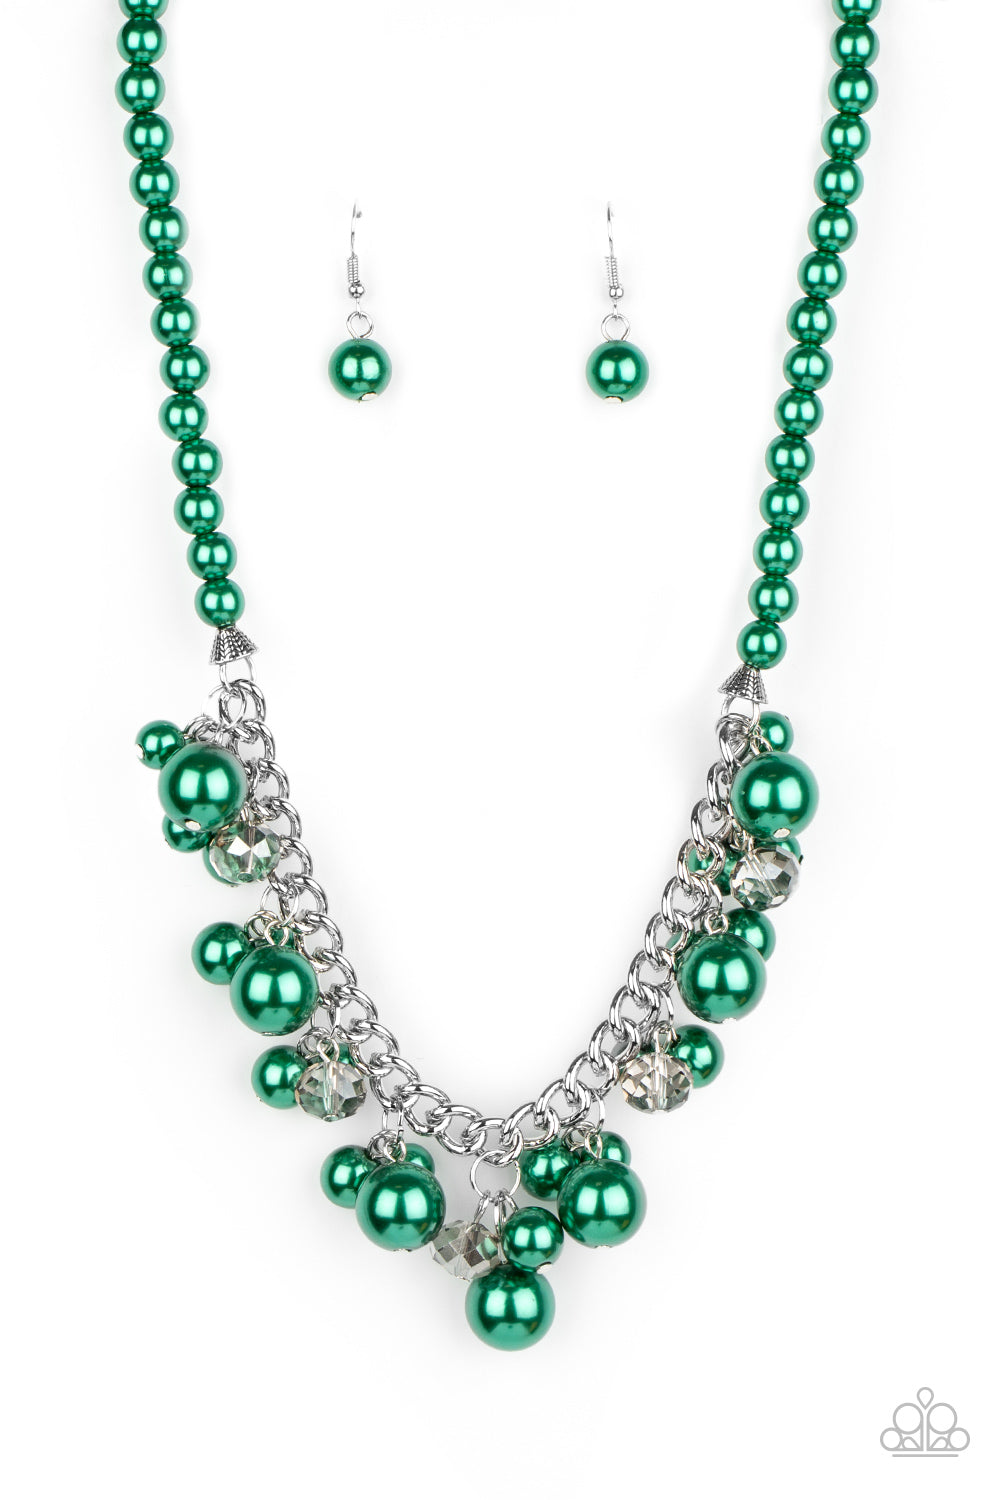 Prim and POLISHED - green - Paparazzi necklace